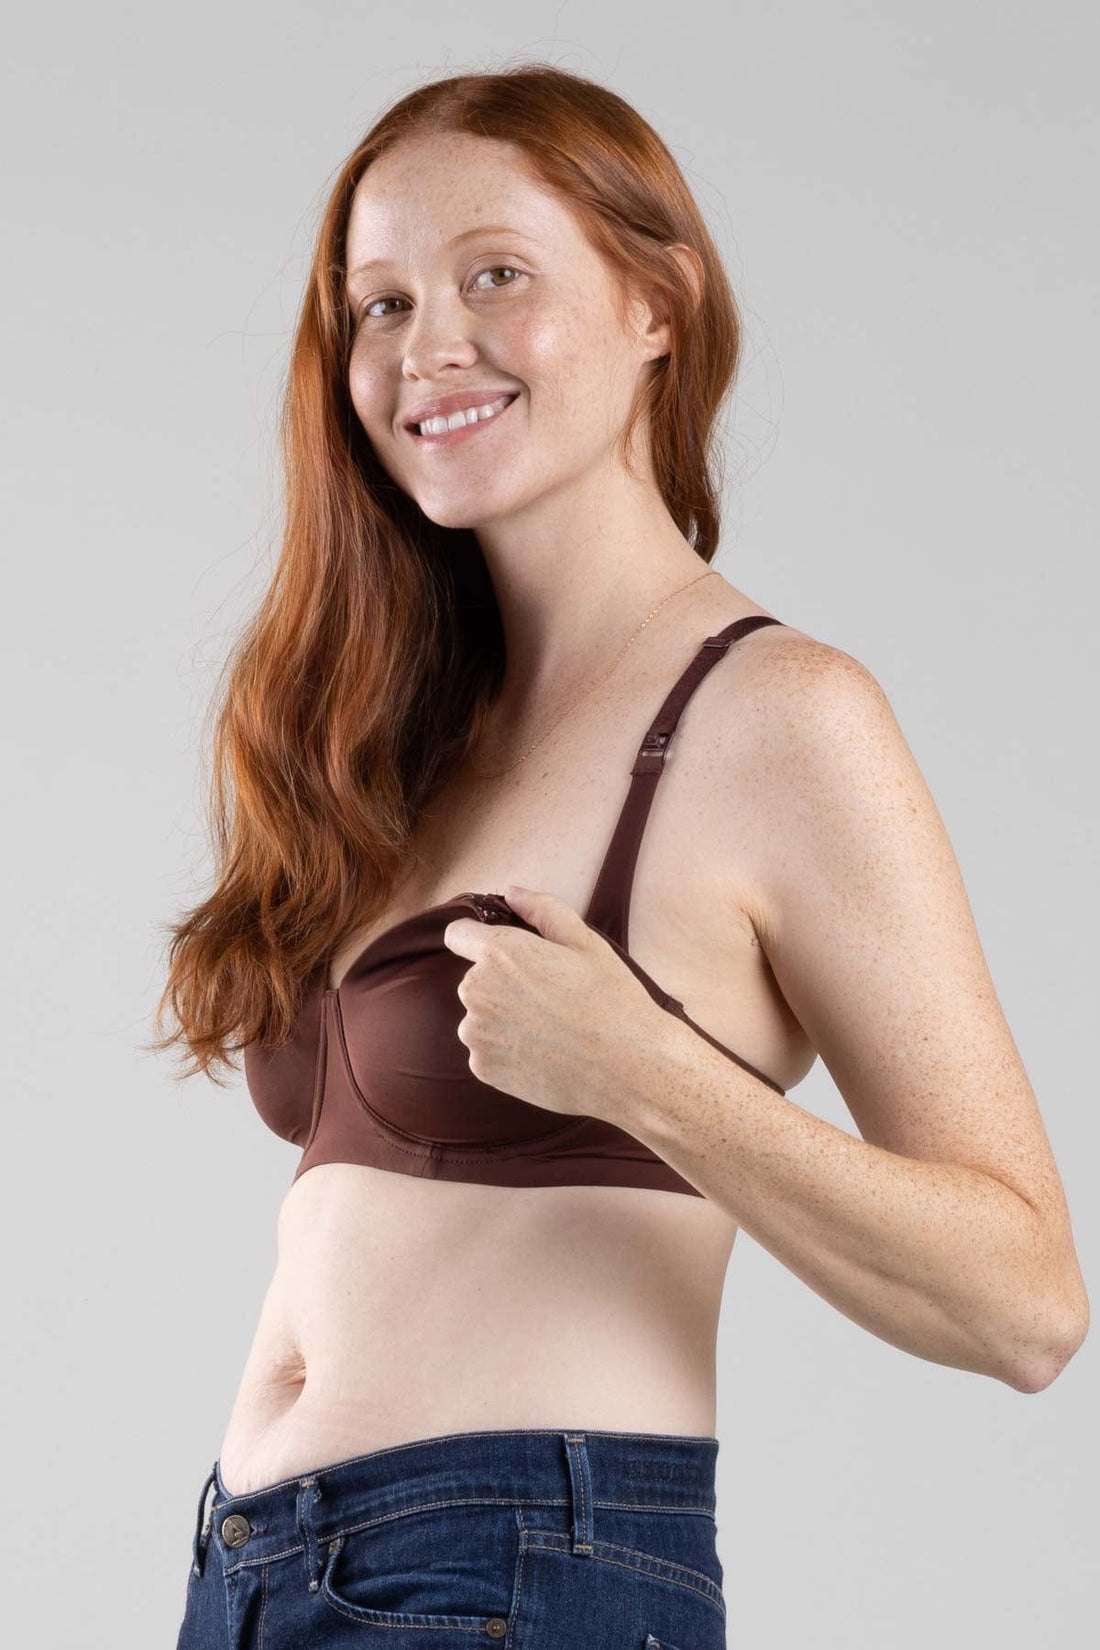 Simple Wishes Pumping and Nursing Bra in One with Fixed Padding - Patented  Supermom T-Shirt - Pumping Bra Hands Free, Bitter Chocolate, 30A